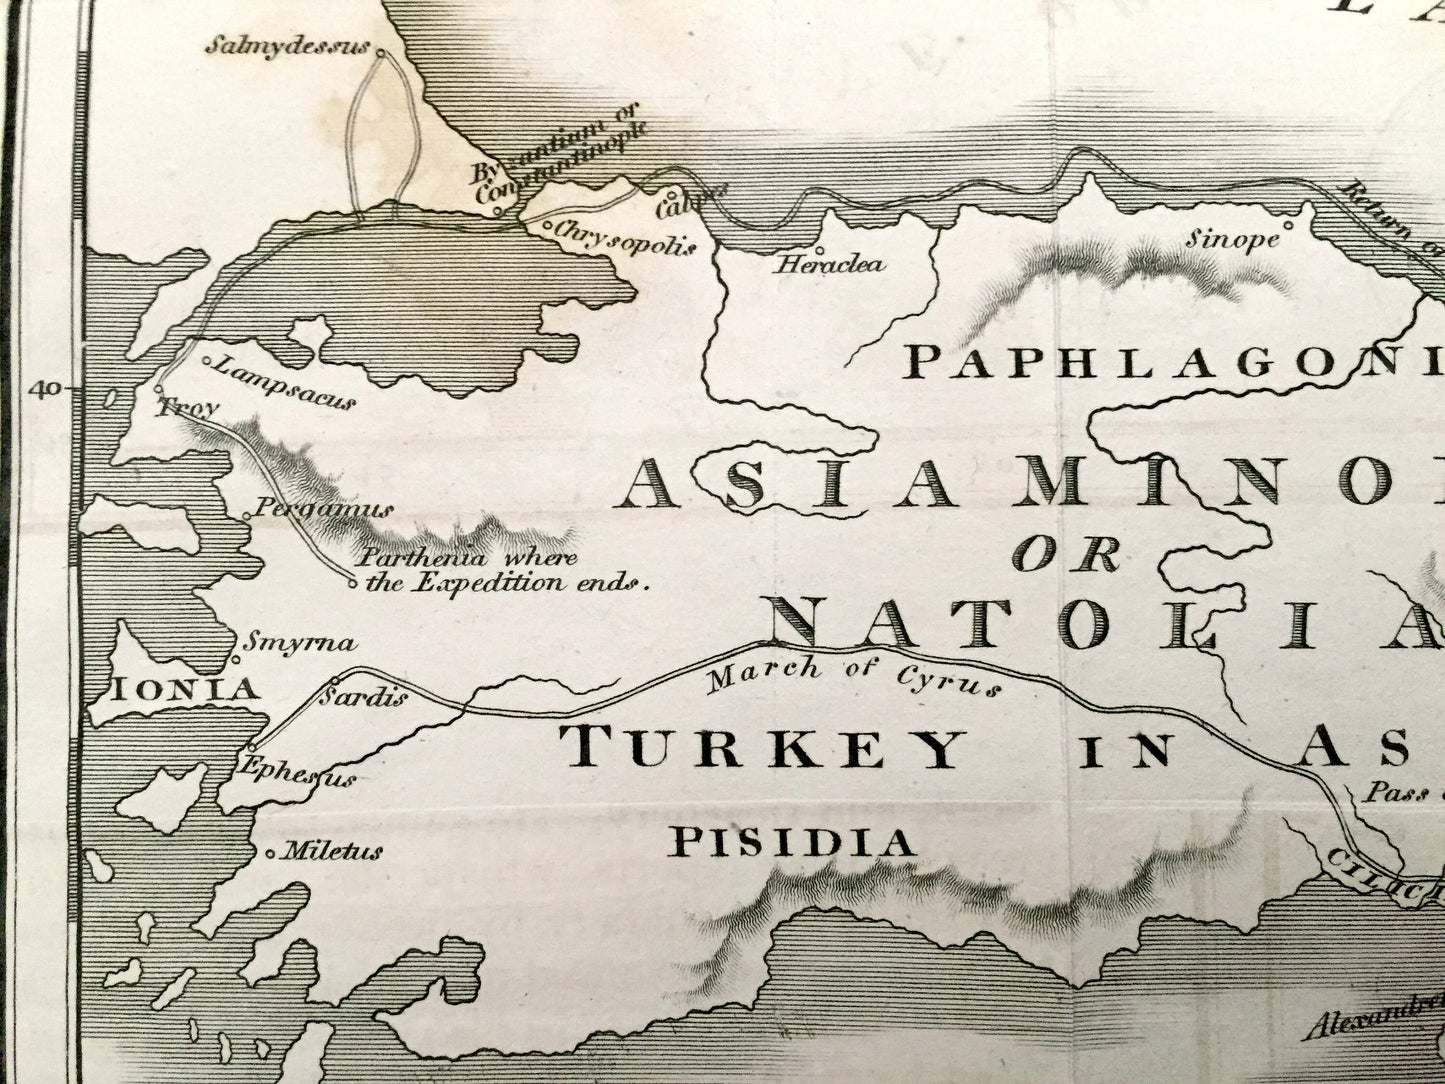 Antique 1808 Retreat of the Ten Thousand Map by D'Anville from Rollins' Ancient History – Turkey Syria Cyprus Greece Middle East Israel Iraq